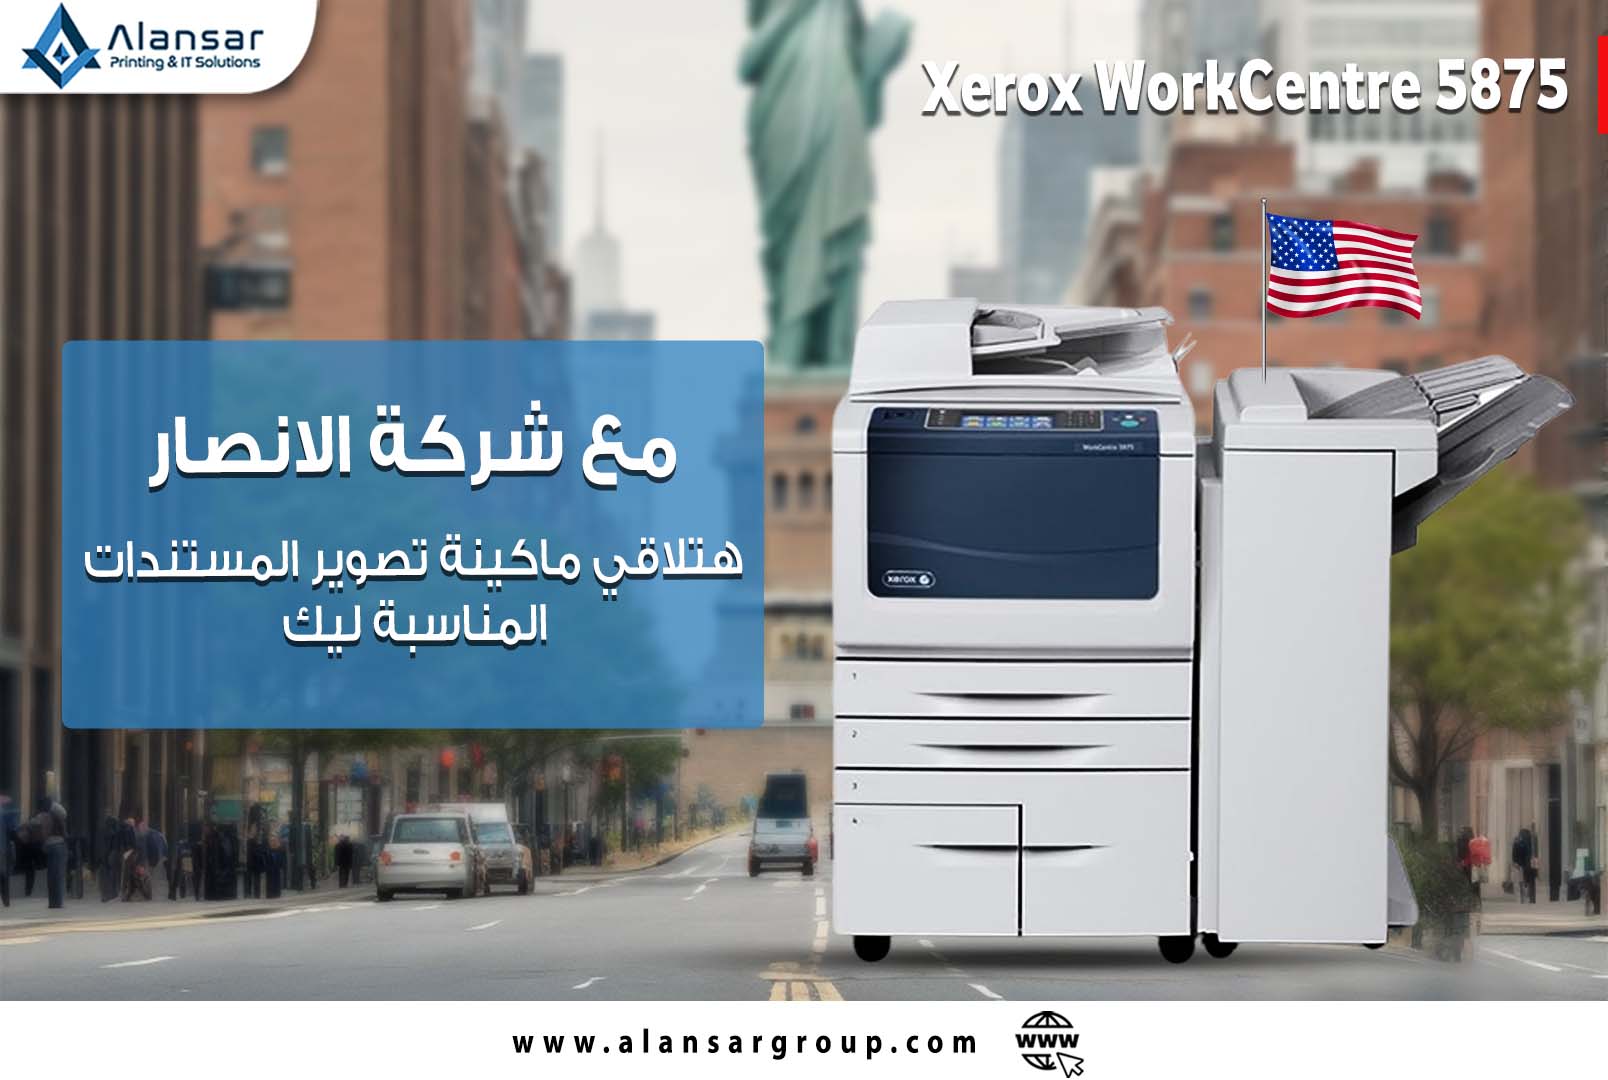 The cheapest black and white photocopier from Xerox